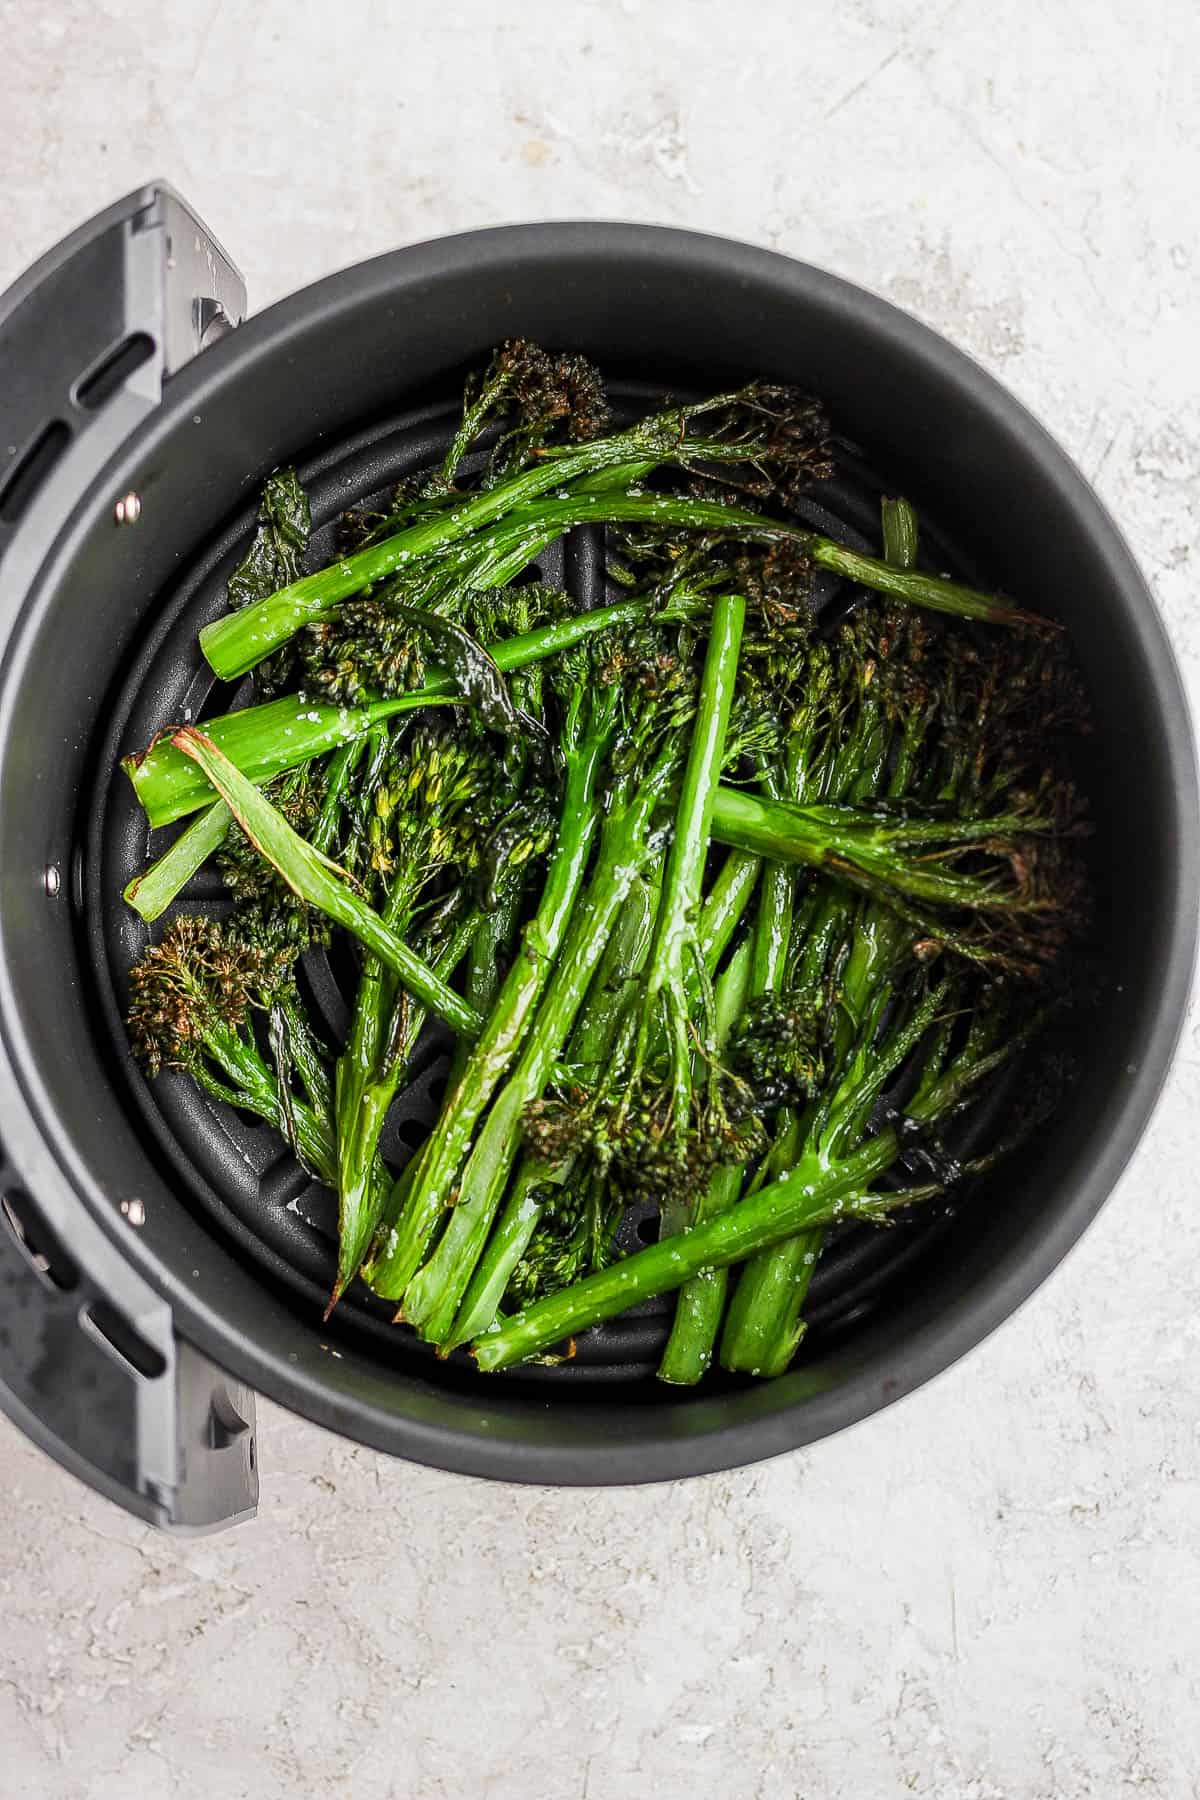 The air fryer basket with broccolini after cooking.